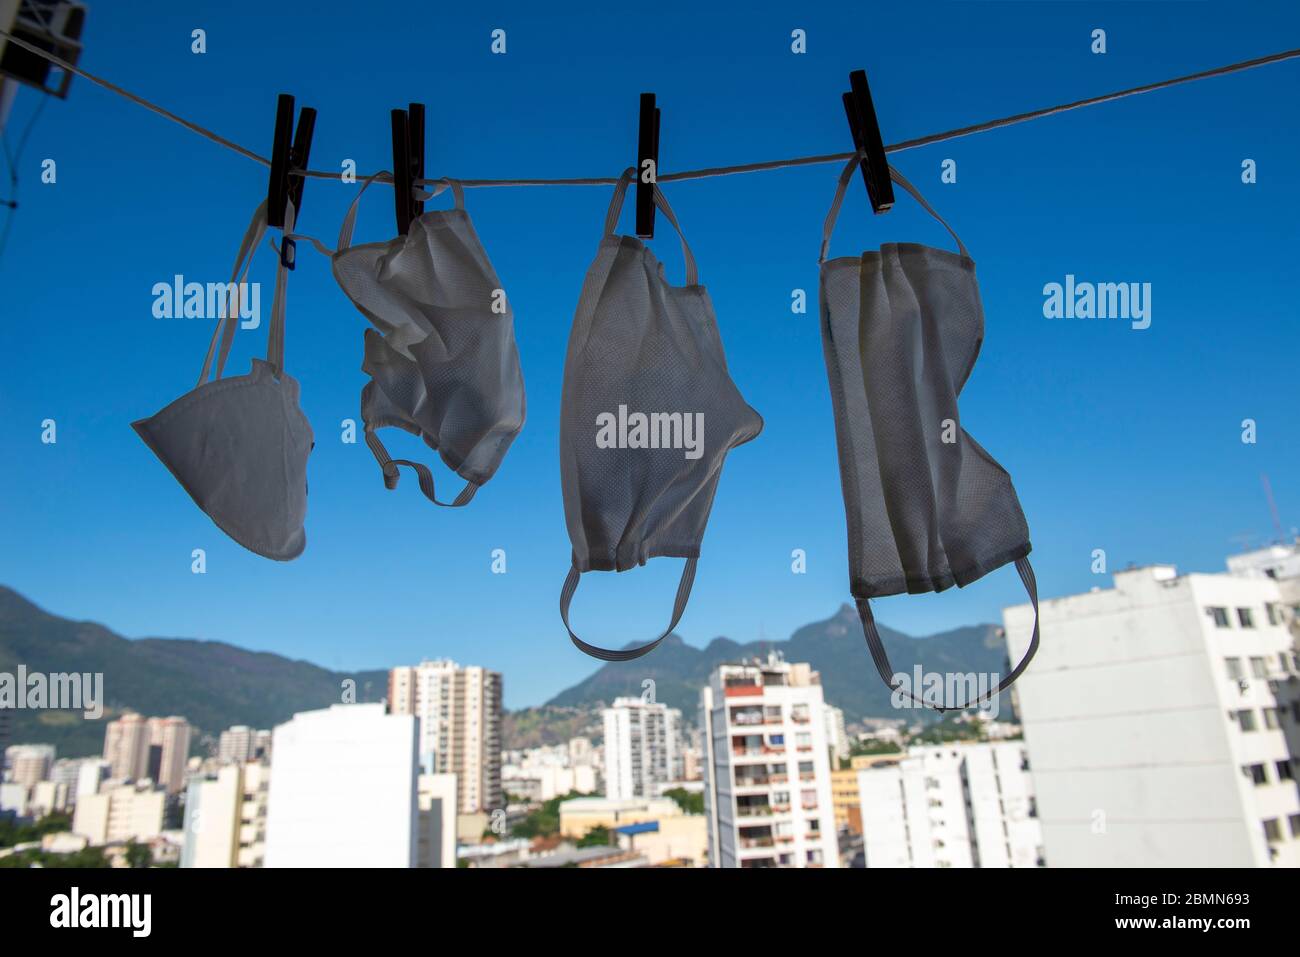 masks drying after washing to sterilize covid-9 in a apartment balcony Stock Photo